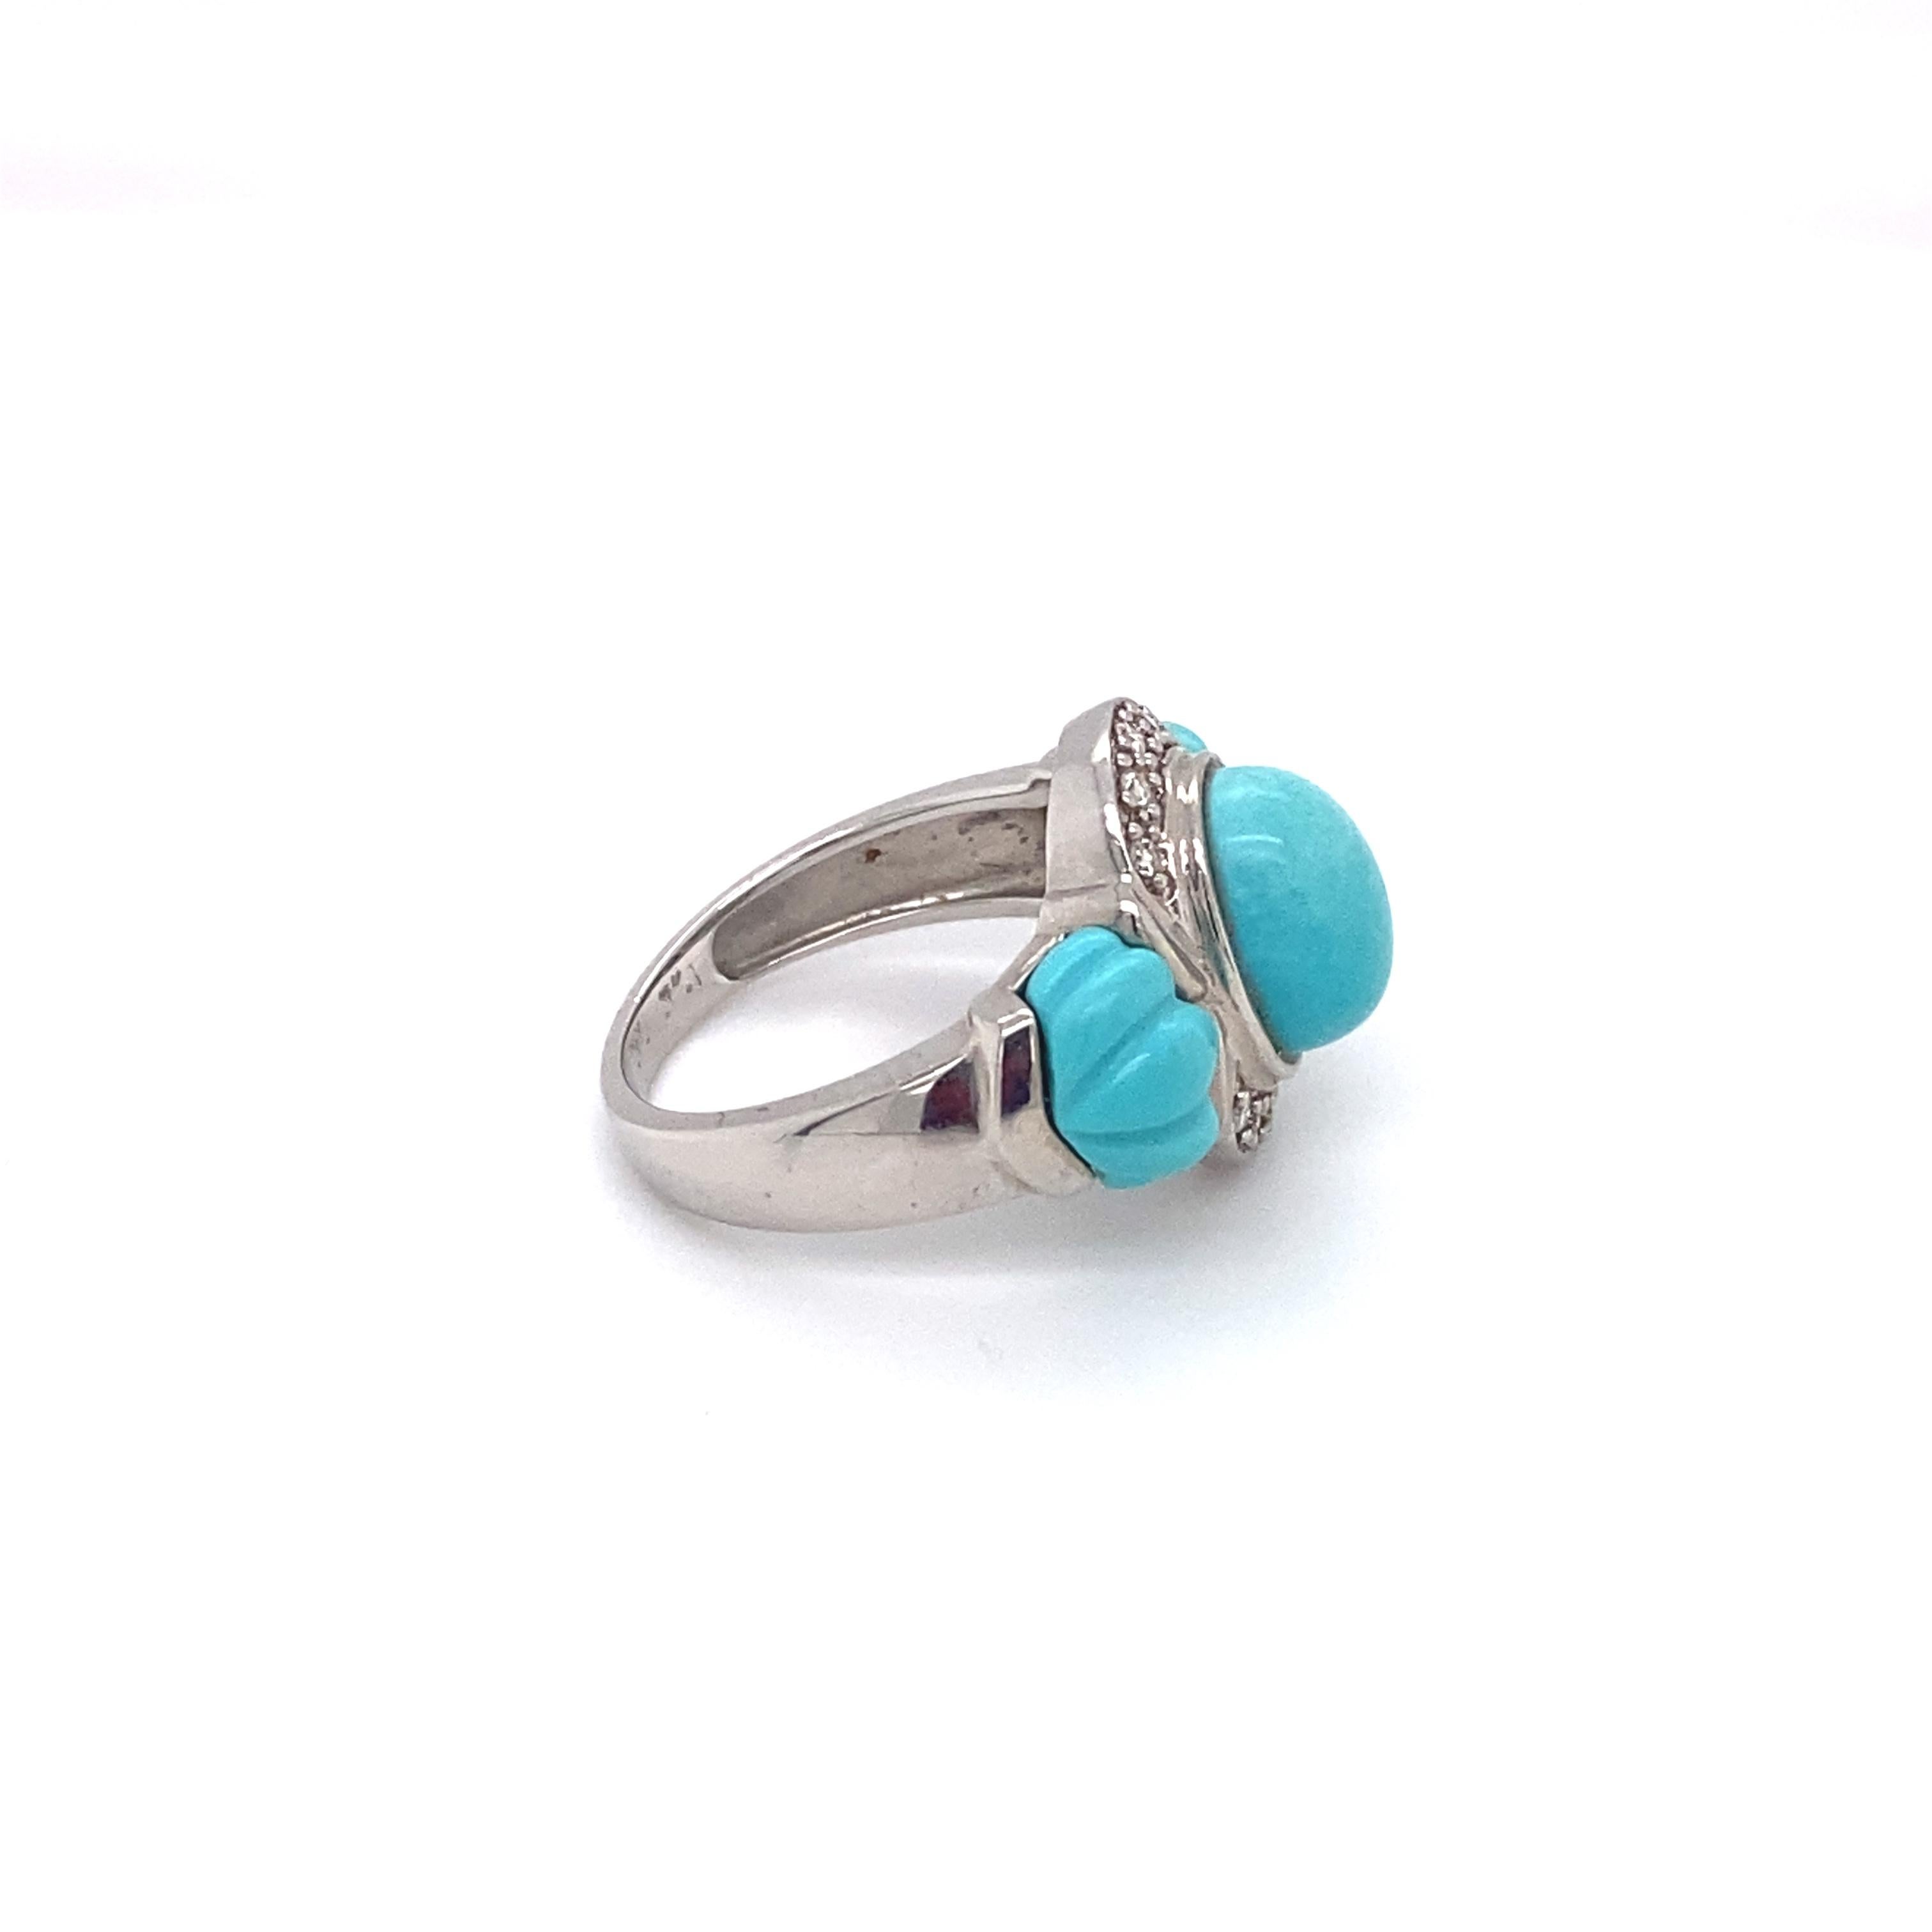 Circa: 1980
Metal Type: 14K white gold 
Weight: 5.4 grams
Size: US 4.5

Featuring 3 Turquoise gemstones and accent diamonds
Symmetrical and beautifully crafted design
Hallmarked 14K
